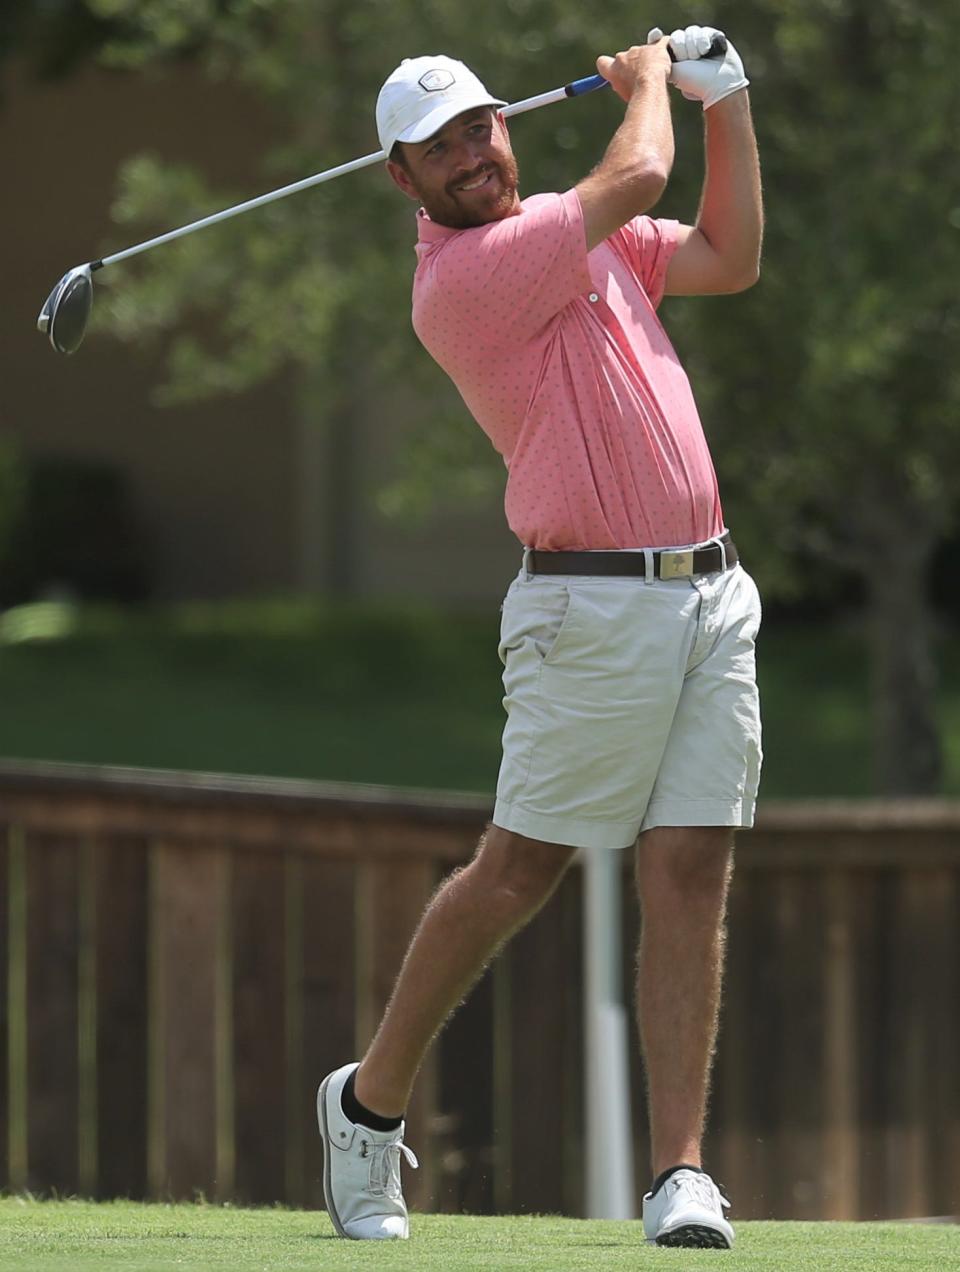 Patrick Box hits a tee shot during the final round of the Bentwood Country Club Men's Partnership golf tournament on Sunday, July 24, 2022.